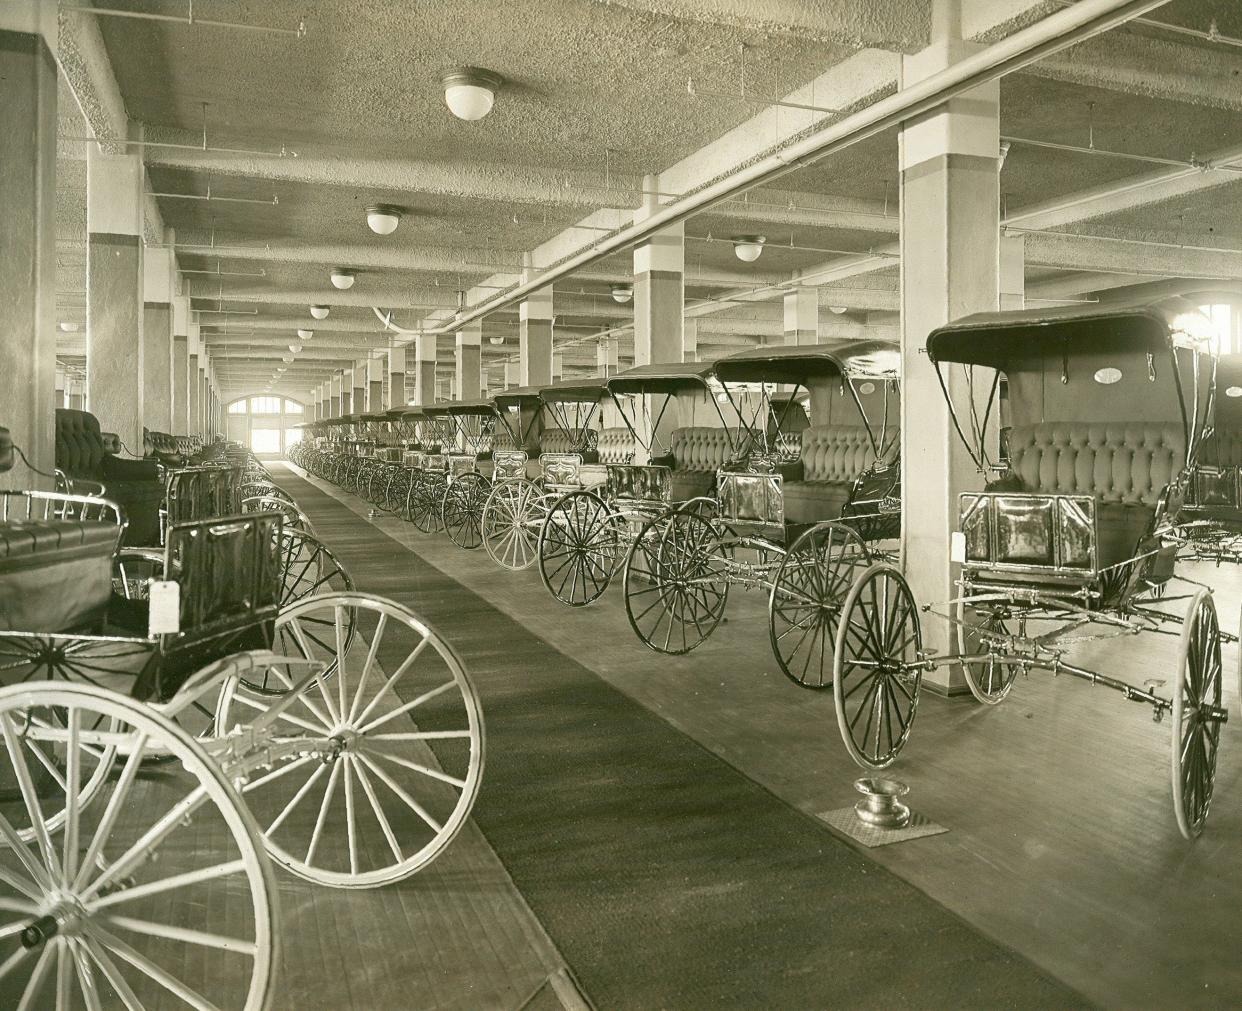 The first floor of the Studebaker Corp. headquarters orginally housed a diplay of the company's wagons, carriers and automobiles. Most of the vehicles are now in the Studebaker National Museum.